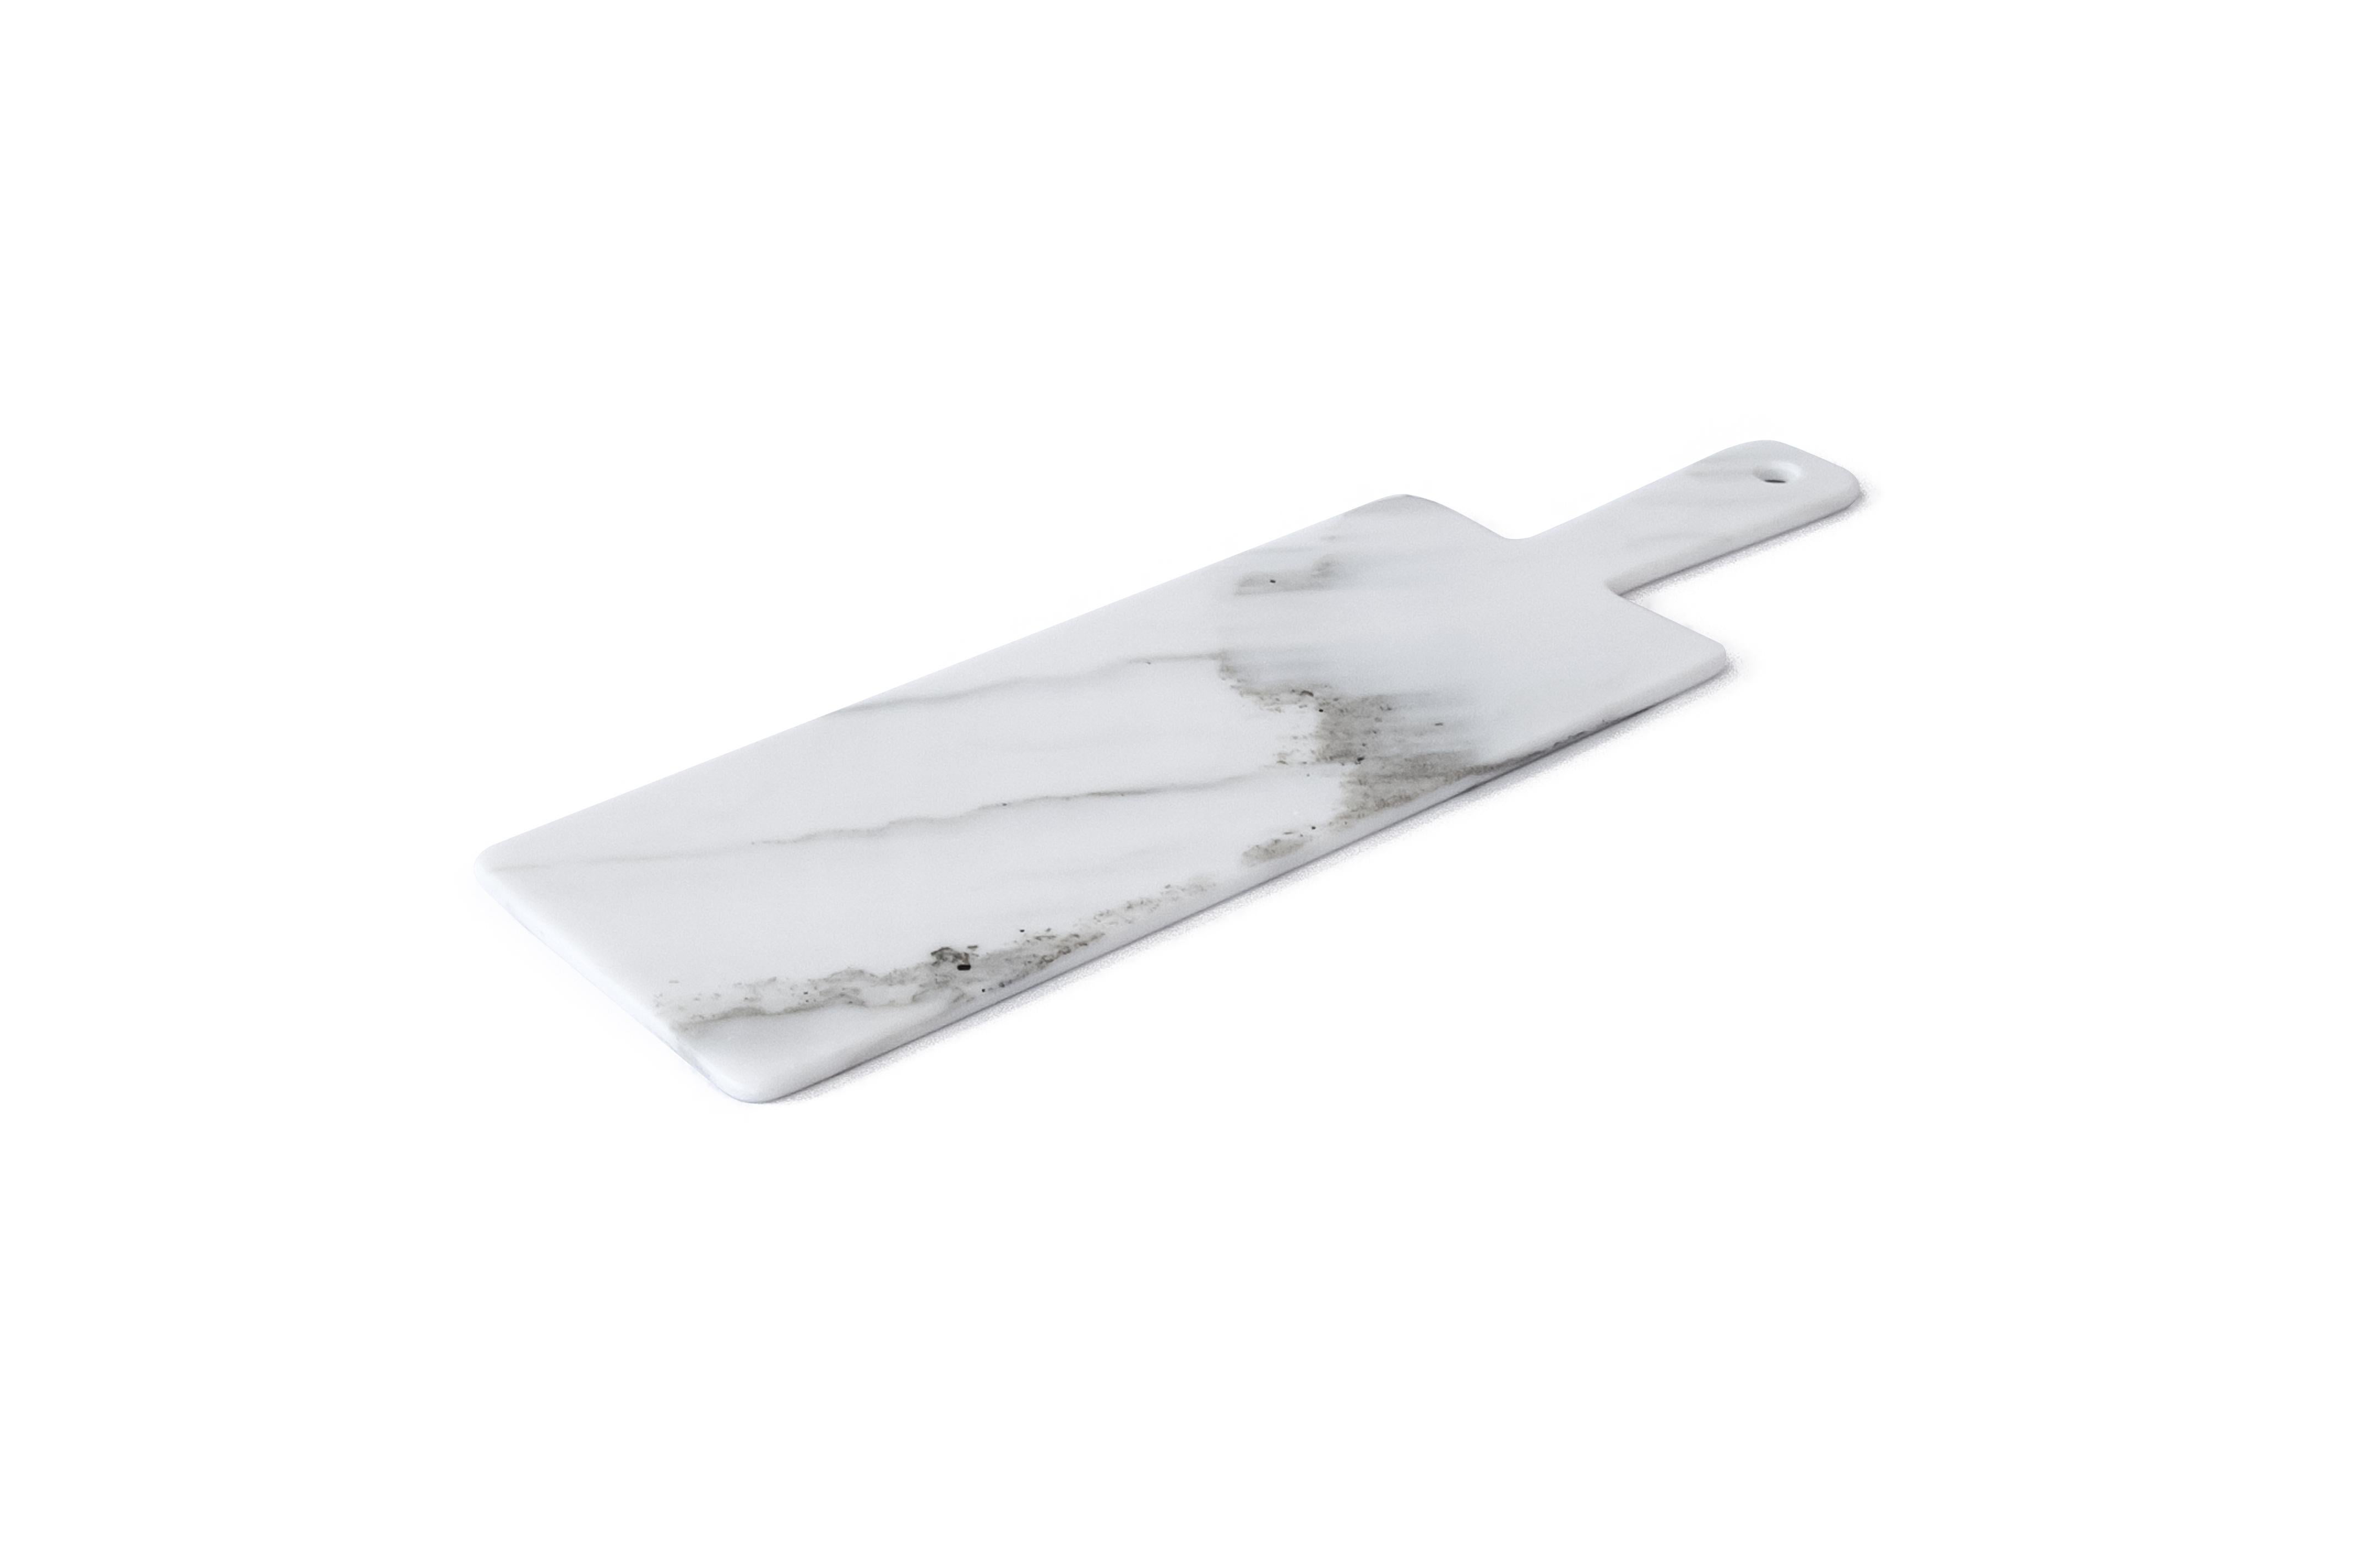 White Carrara marble big long chopping board.

Each piece is in a way unique (every marble block is different in veins and shades) and handmade by Italian artisans specialized over generations in processing marble. Slight variations in shape,